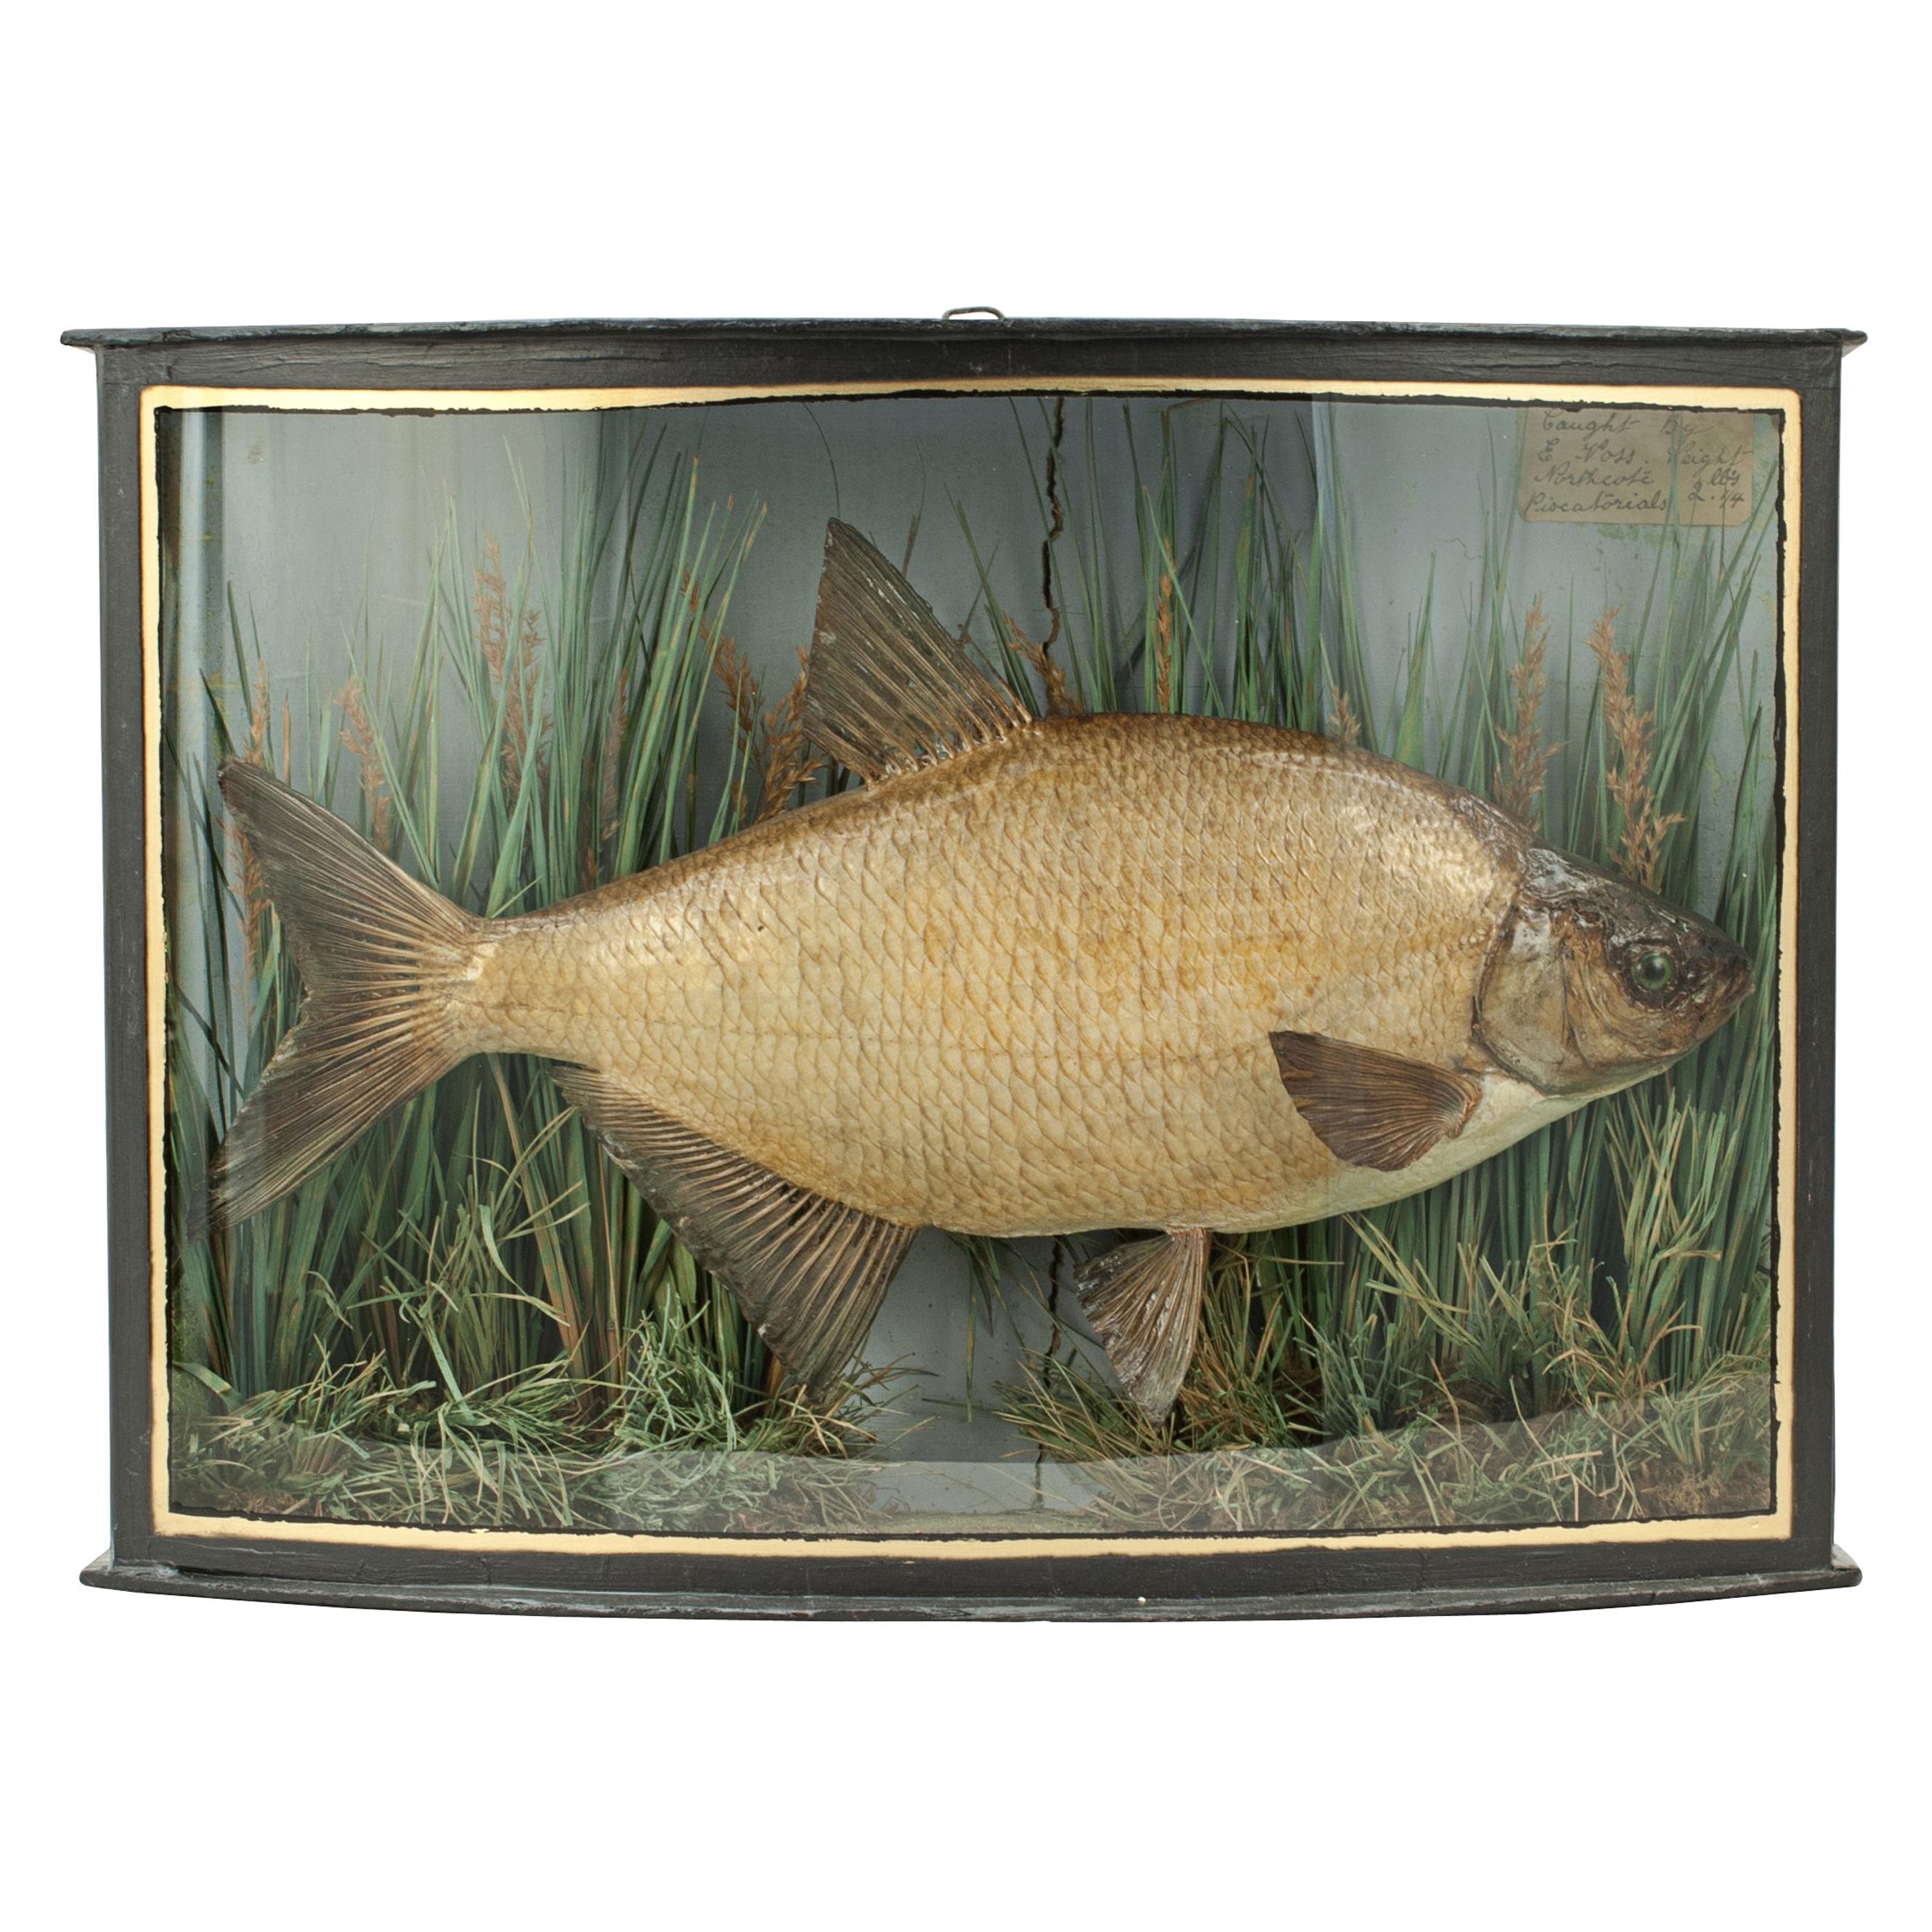 Taxidermy Fish in Bowfronted Case, Bream, Stuffed Fish, River Colne